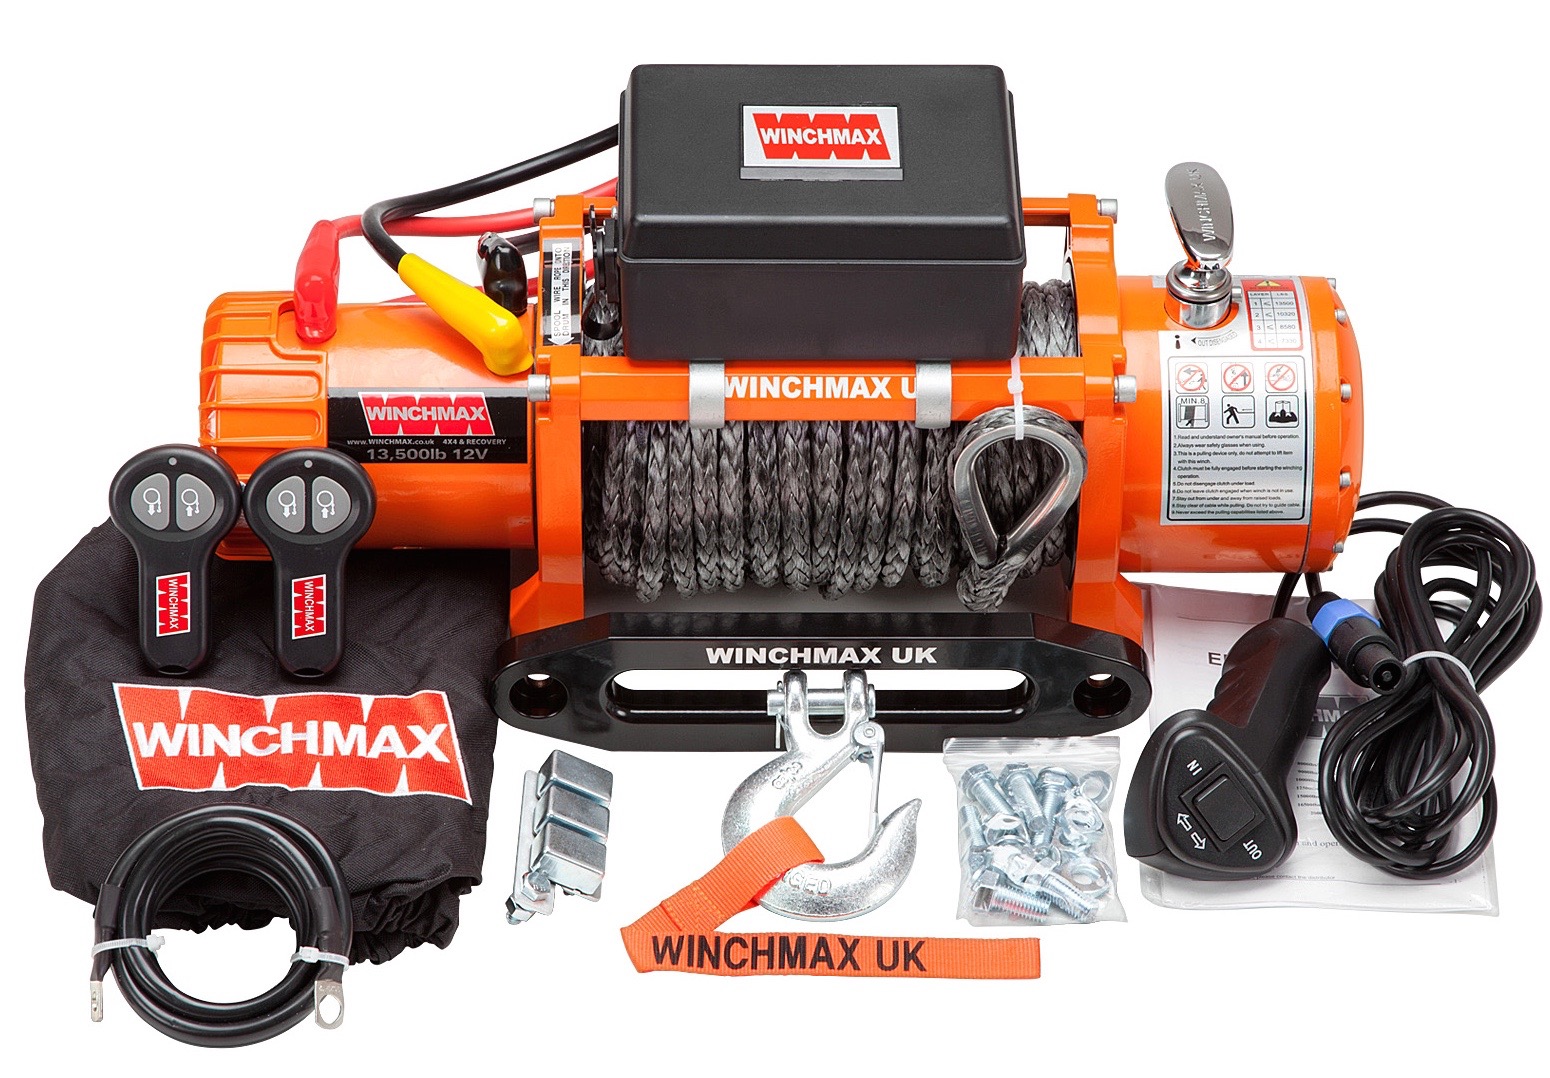  WINCHMAX 13500LB 12V ELECTRIC DYNEEMA ROPE WITH WIRELESS REMOTES